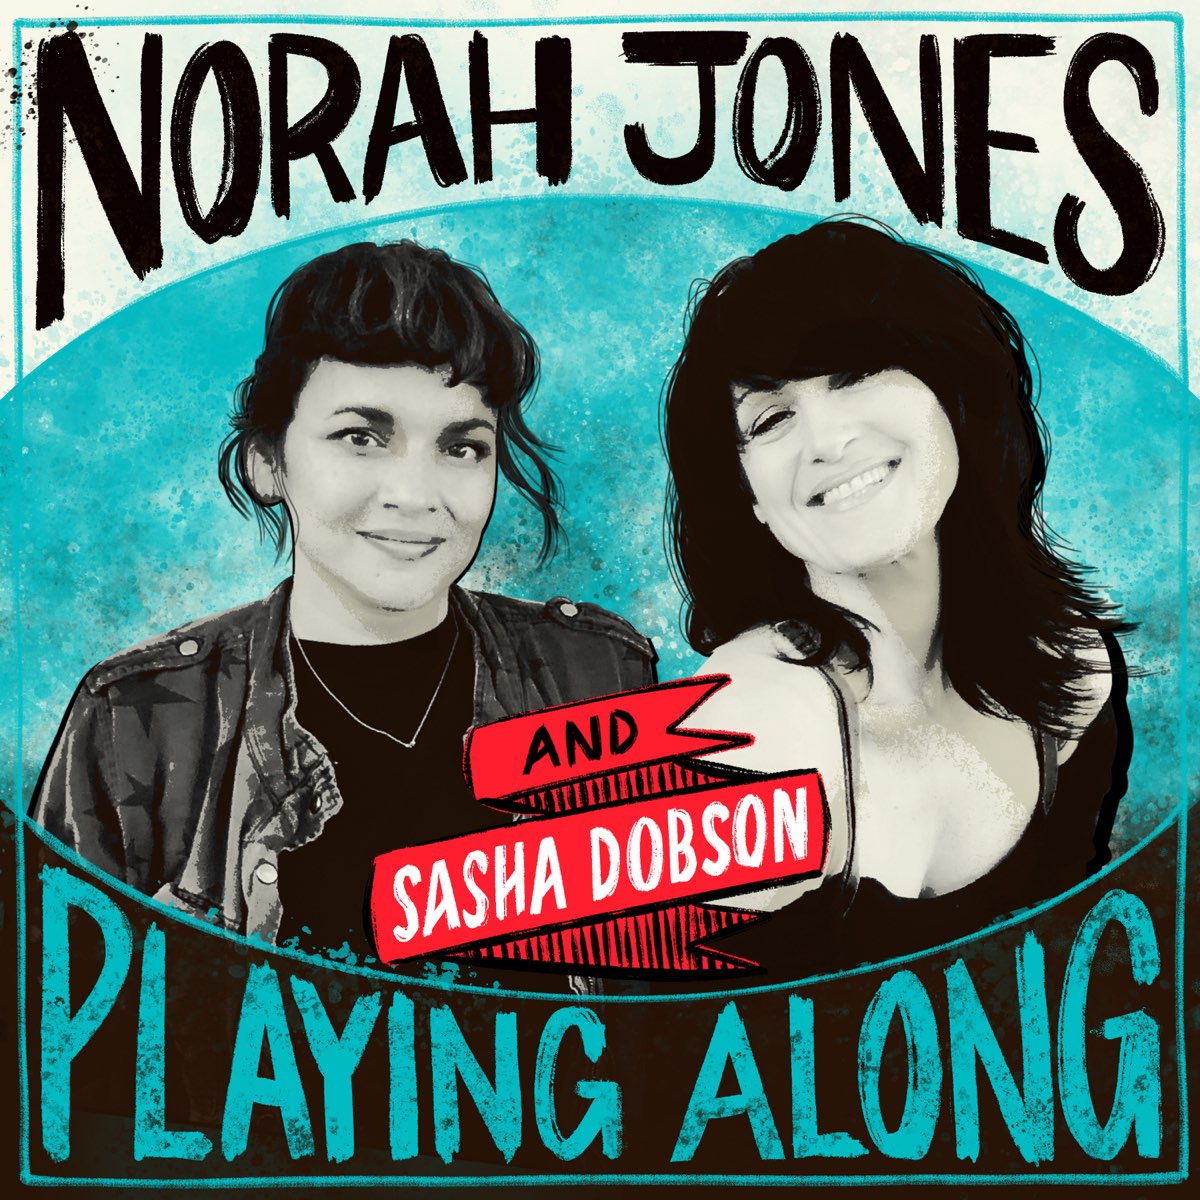 ‎Four Leaf Clover (From “Norah Jones is Playing Along” Podcast ...